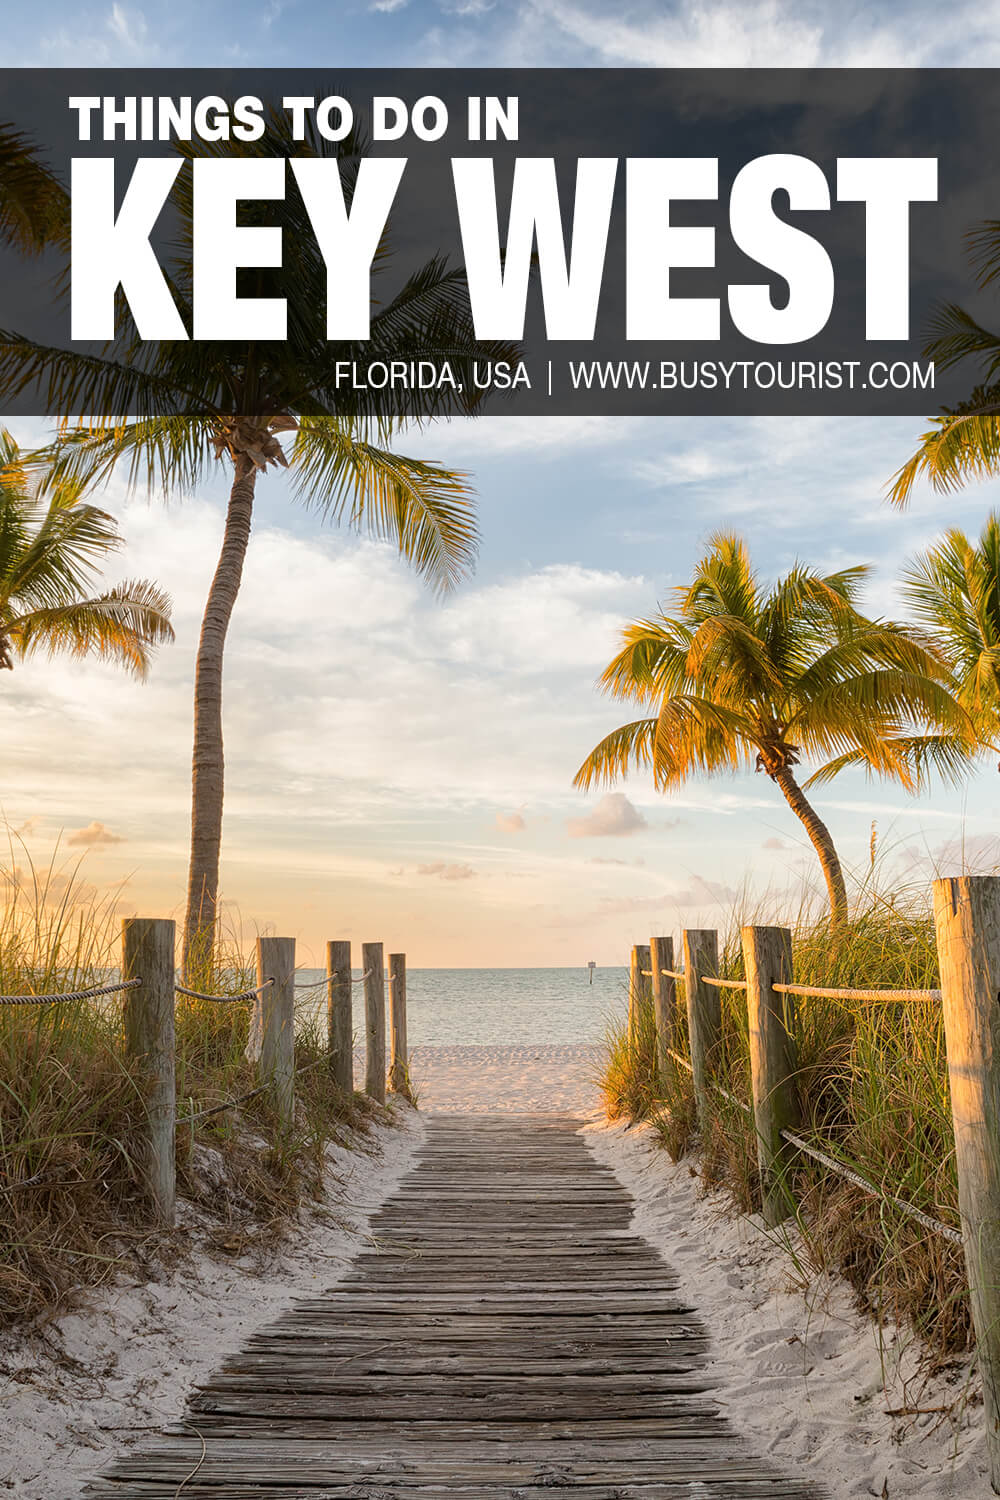 29 Best And Fun Things To Do In Key West Florida Attractions And Activities